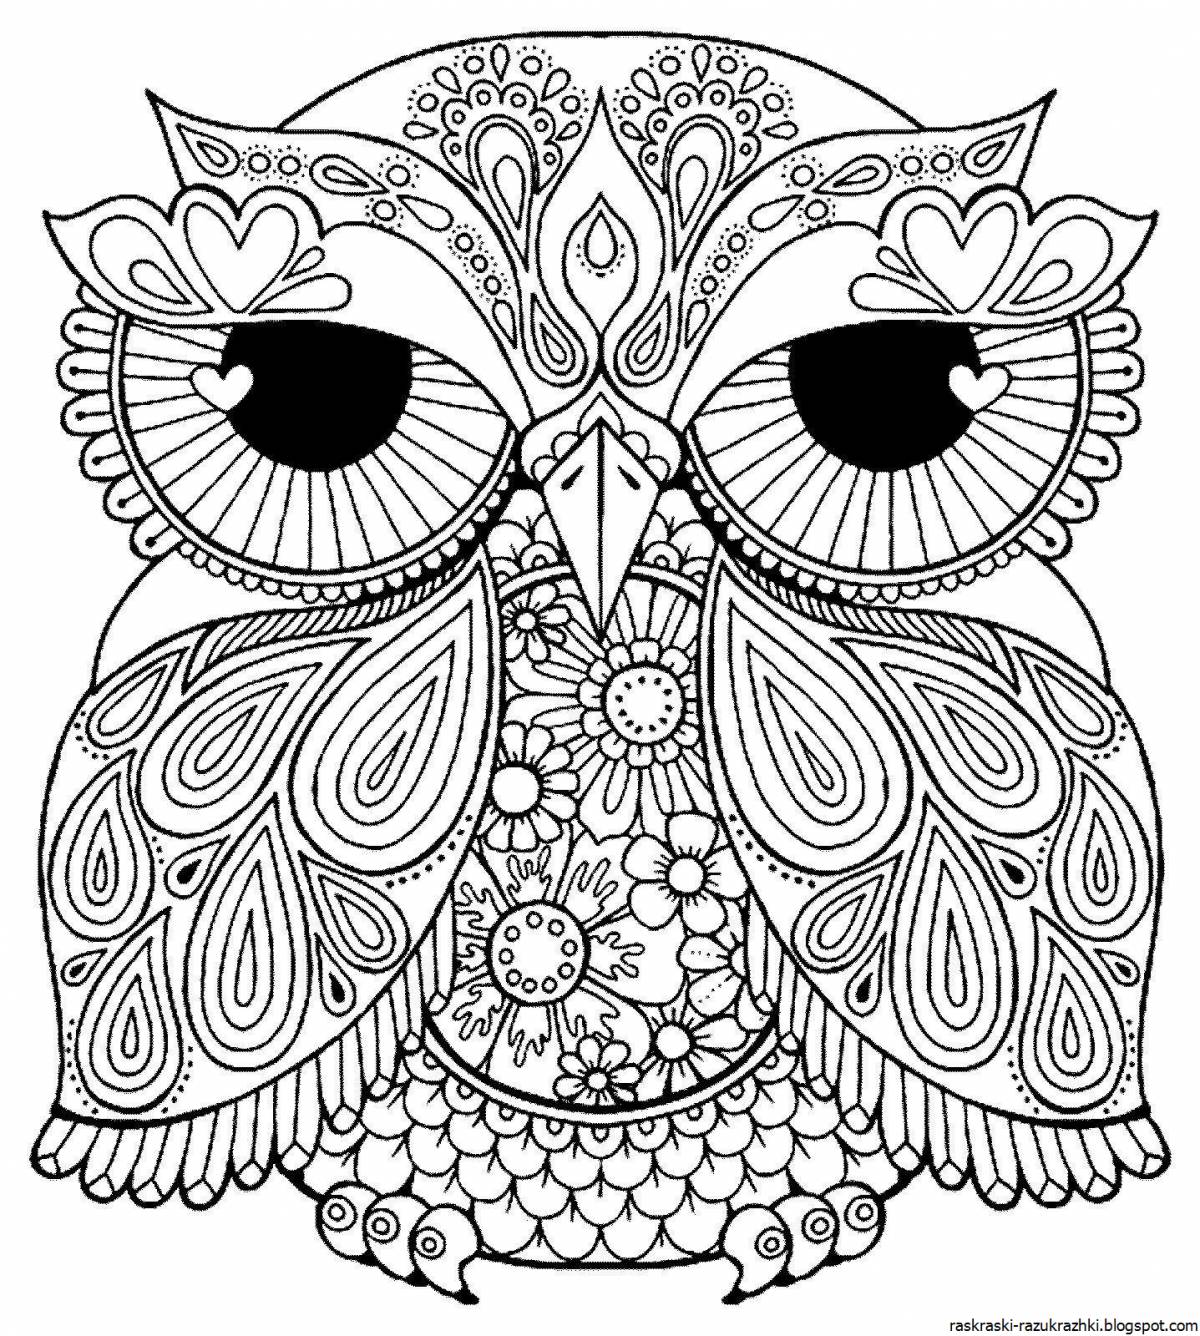 Rejuvenating anti-stress coloring book for adults